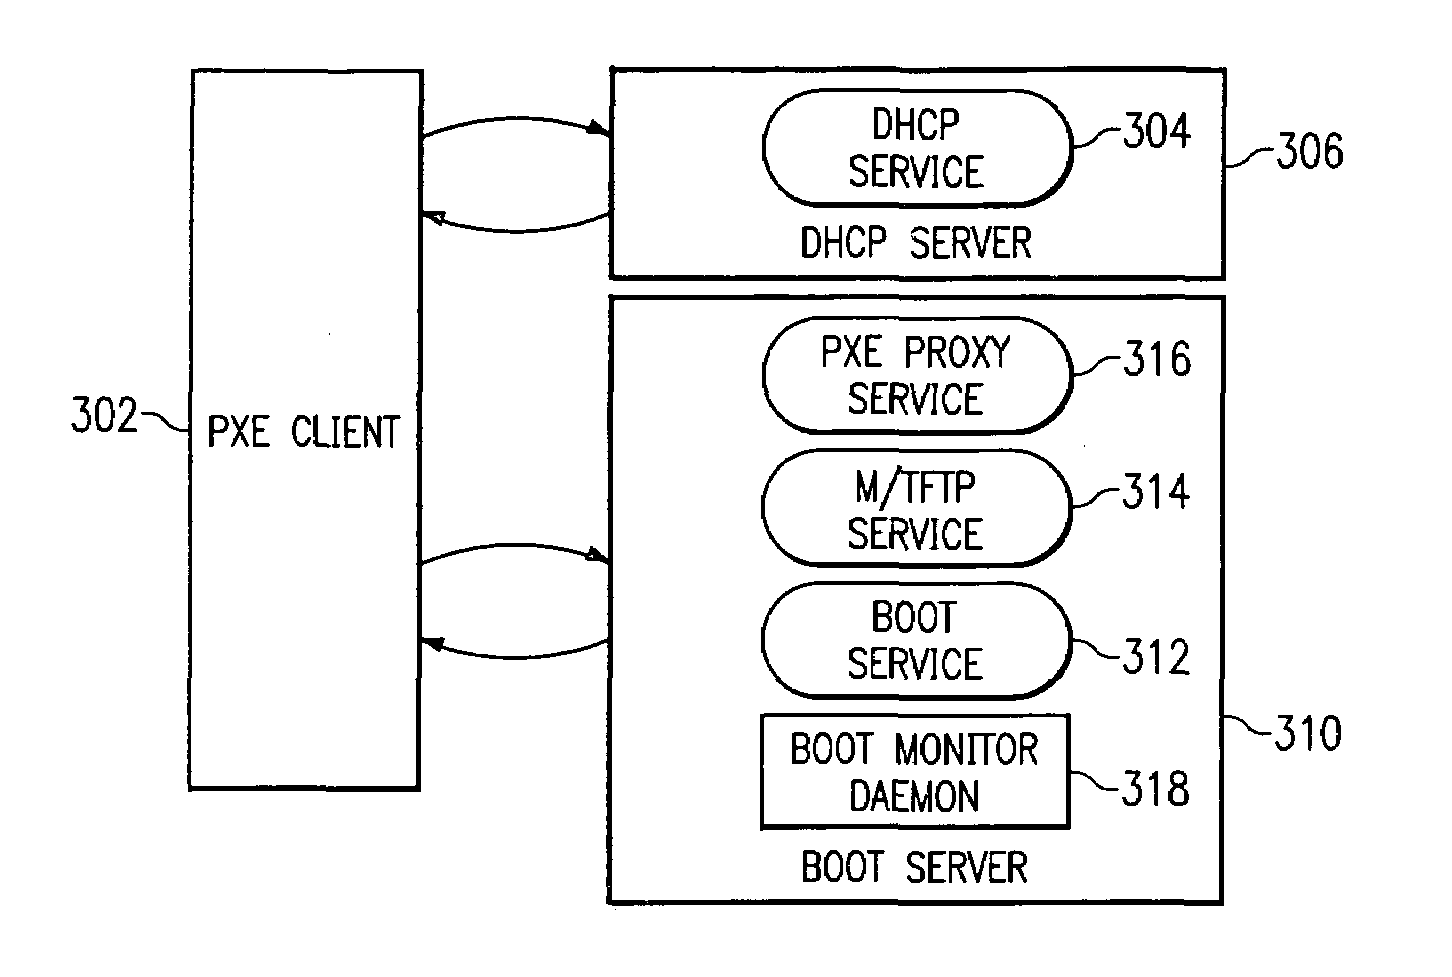 Method and system for fault-tolerant remote boot in the presence of boot server overload/failure with self-throttling boot servers